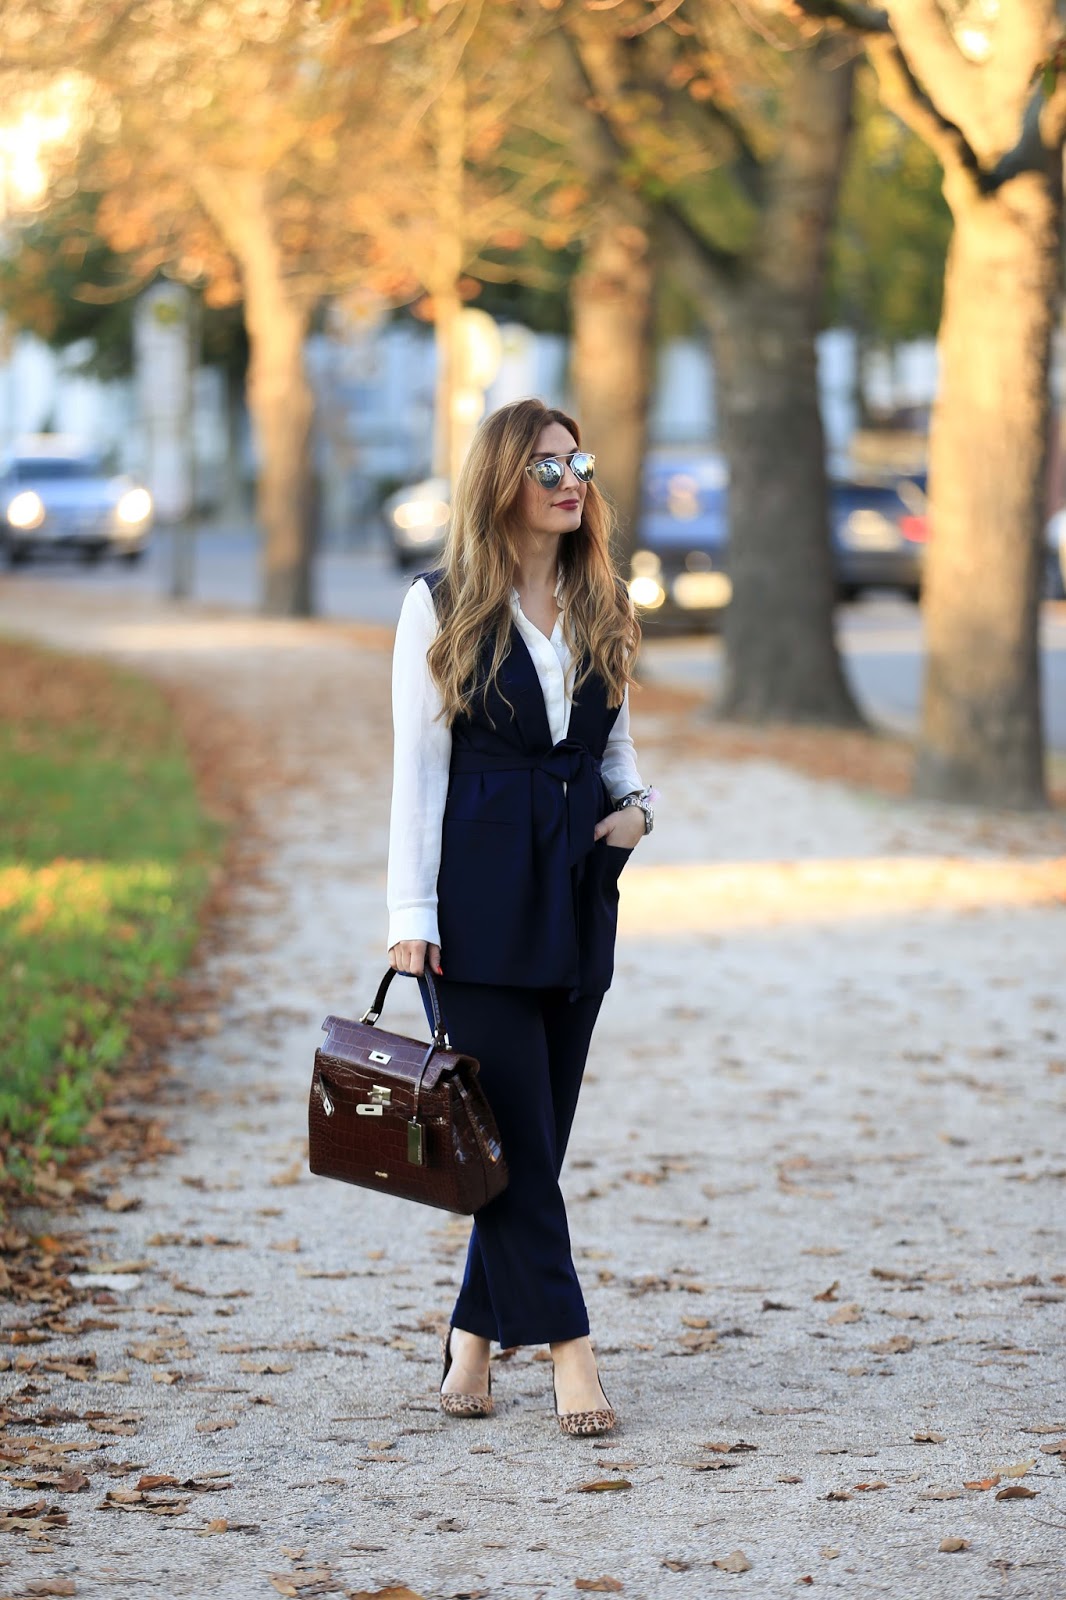 Dior Sonnenbrille-Blogger mit Dior sonnenbrille-casual Chic Look-Blogger-Fashionblogger-Streetsylelook-Streetstyleblogger-Fashionstylebyjohanna-Olivia Palermo Style -Business look- Casual Look- Chic 